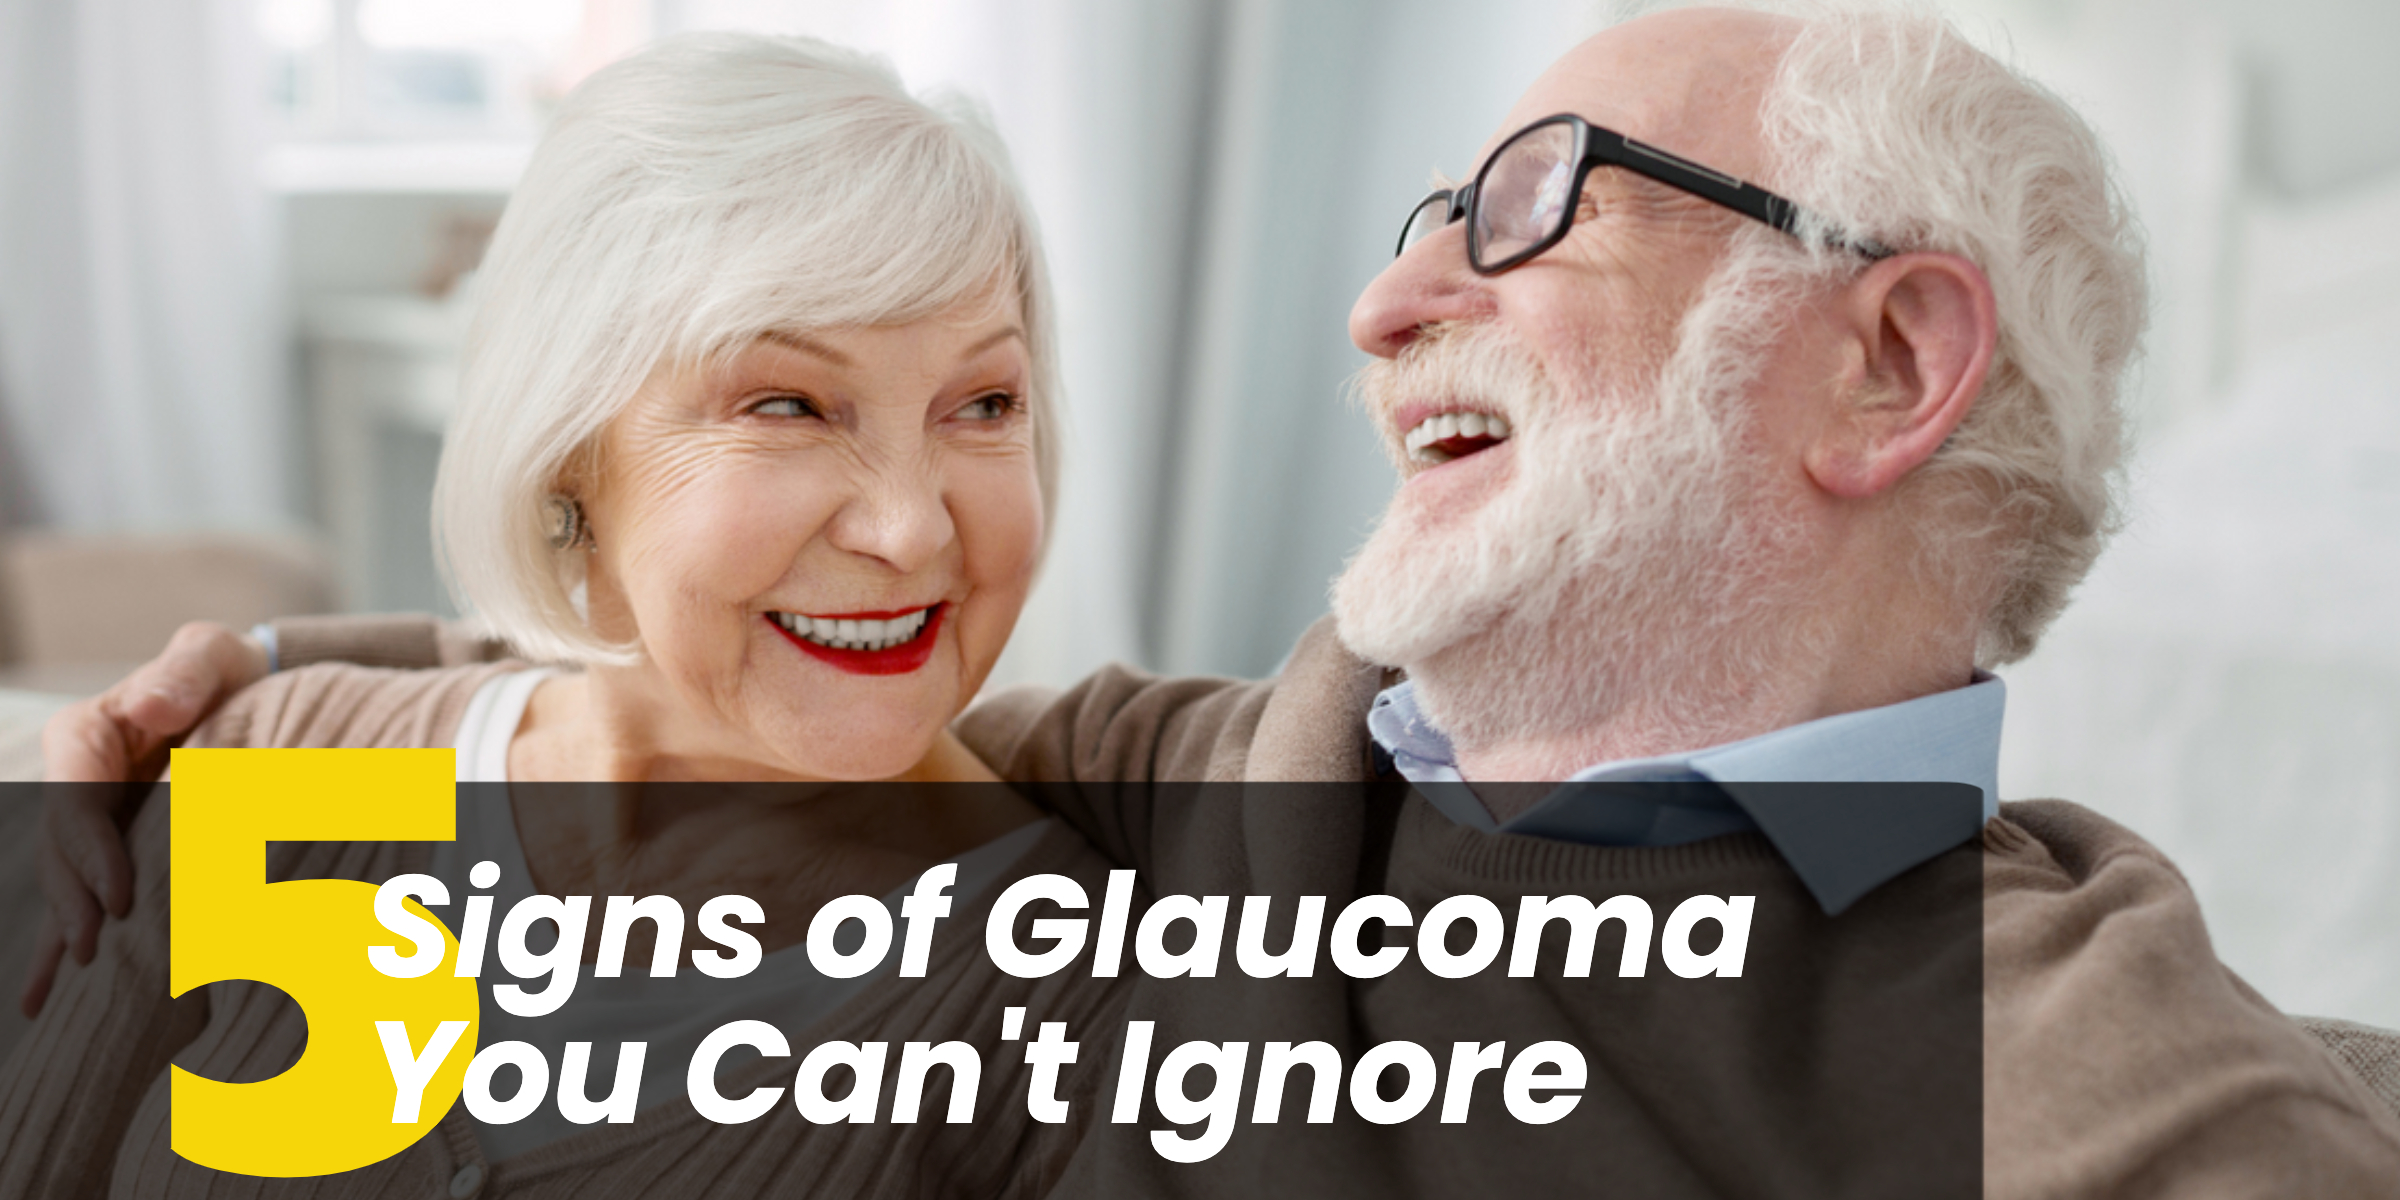 5 Signs of Glaucoma You Can't Ignore